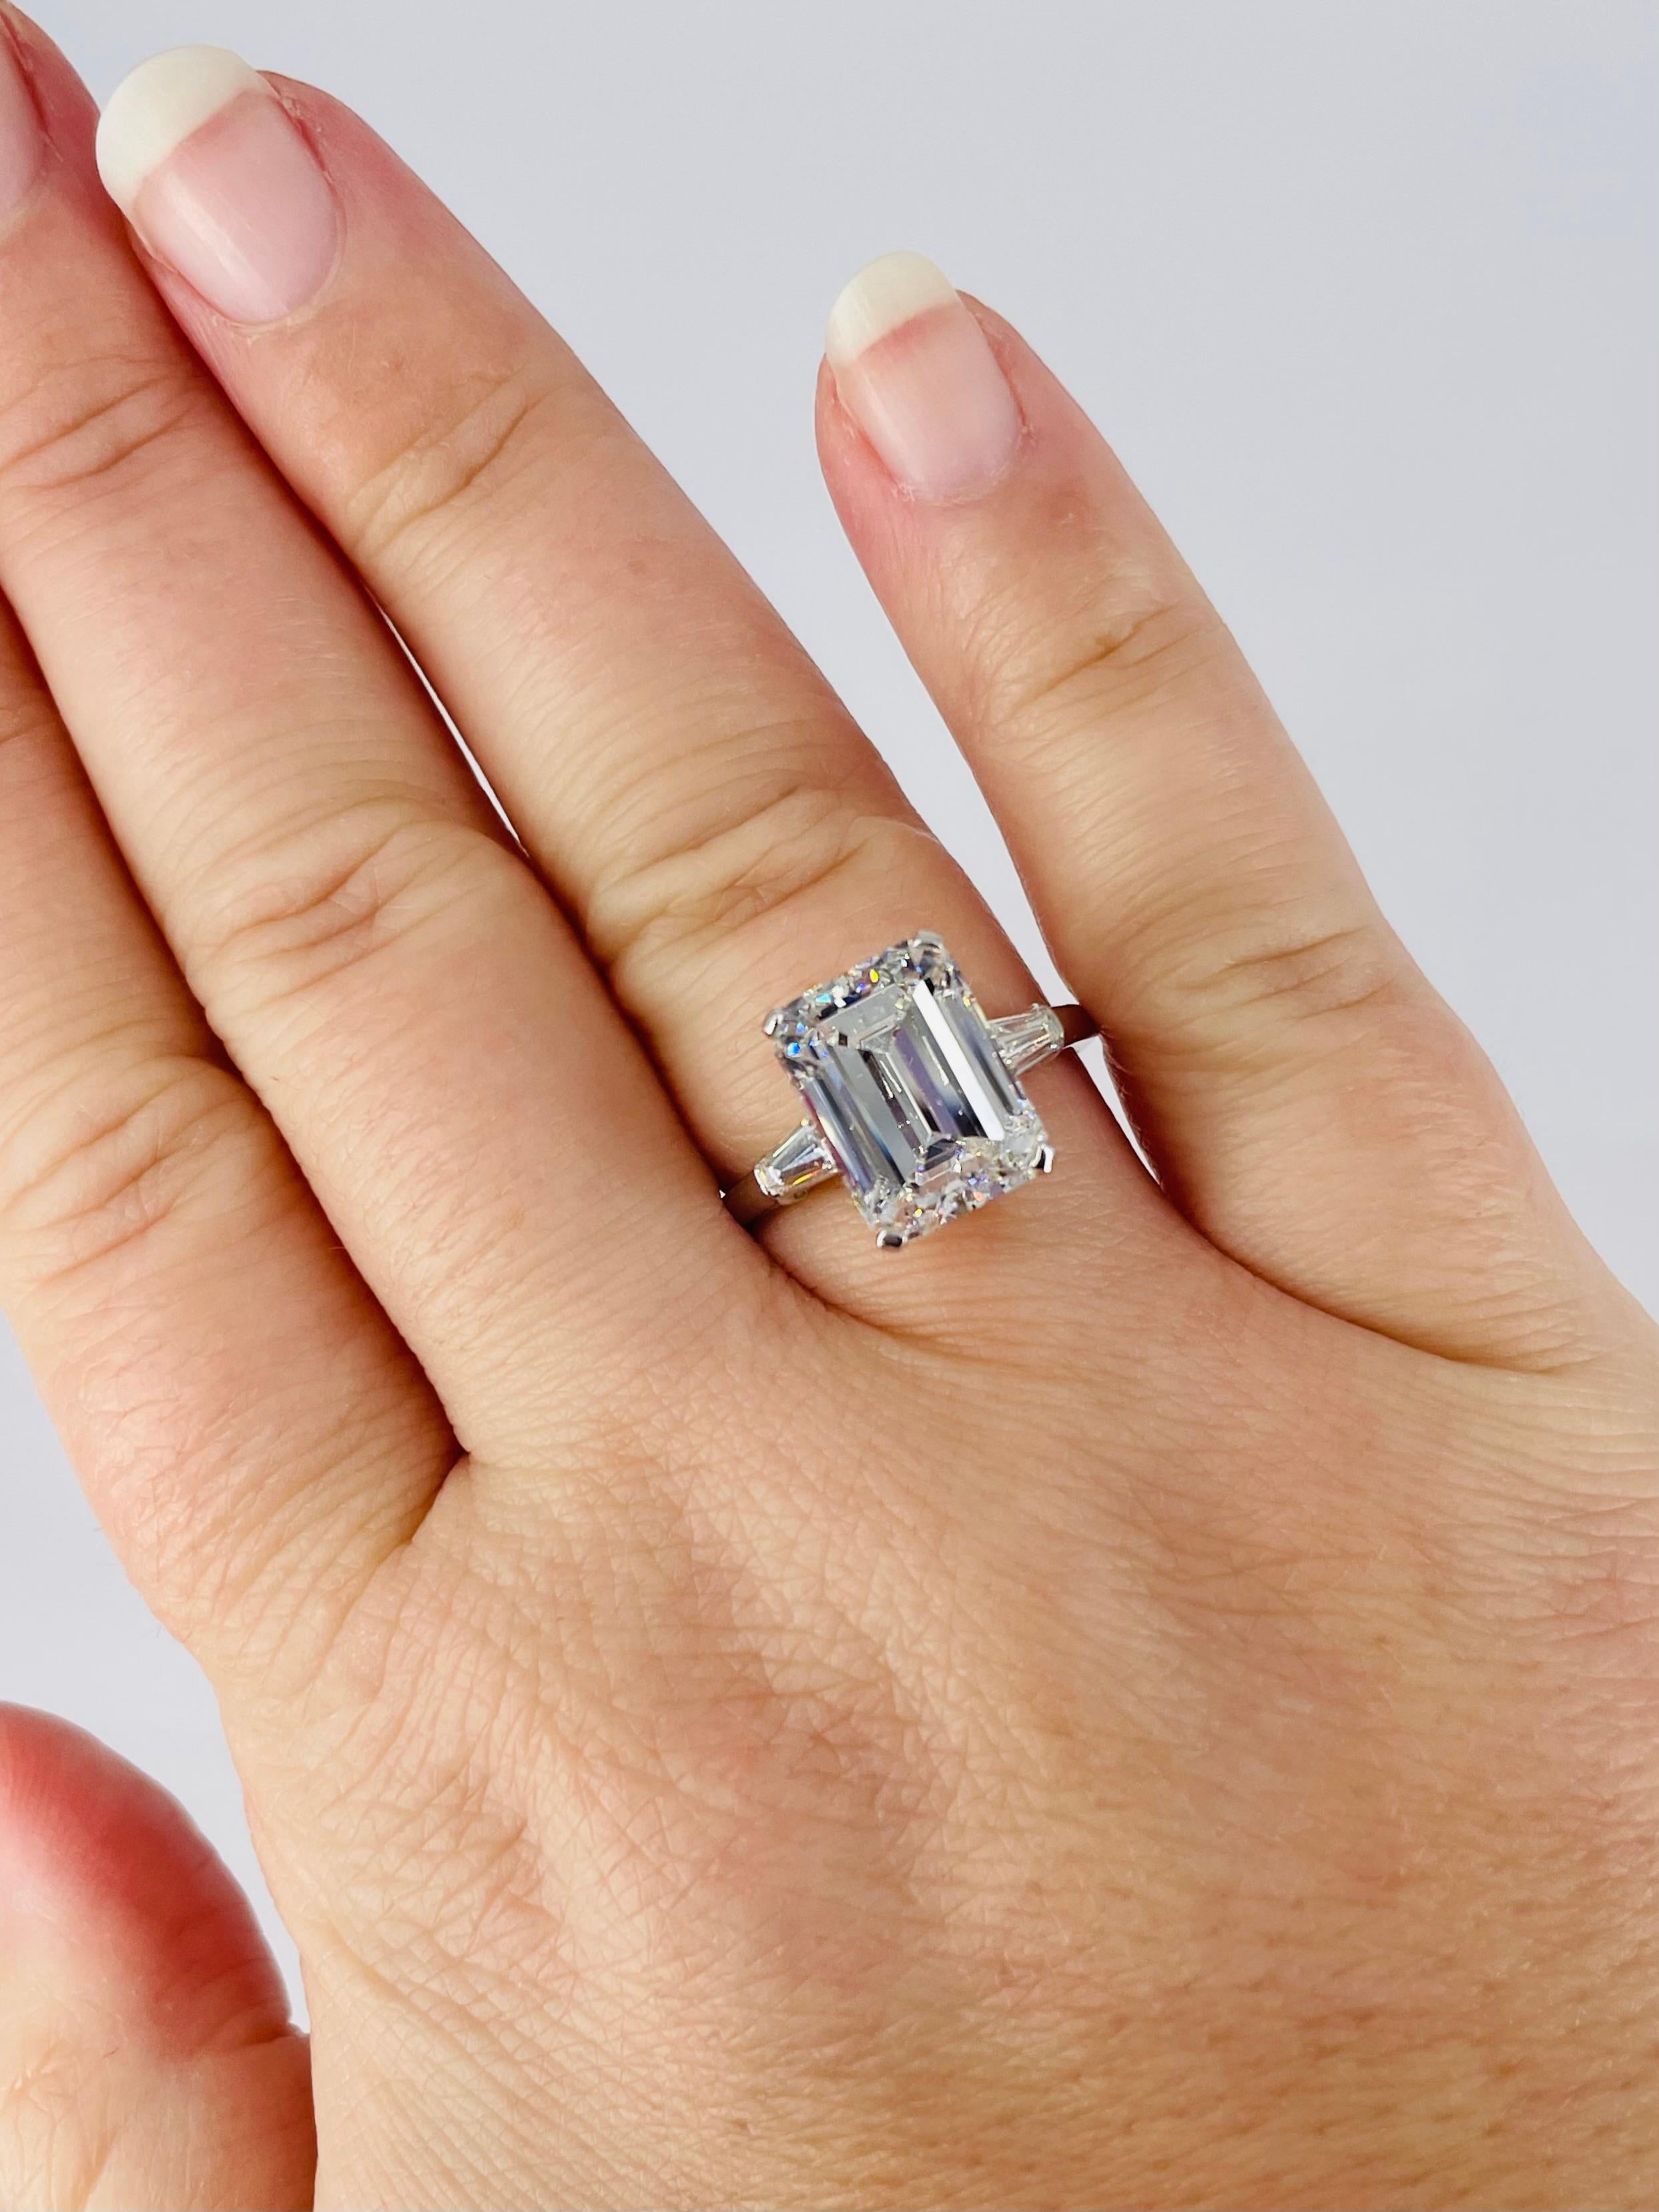 This timeless piece by Bulgari features a 4.98 carat emerald cut diamond, certified by GIA as H color and VVS2 clarity. It is accented by petite tapered baguettes that draw  the eye to the center diamond, and the setting is crafted in platinum. The